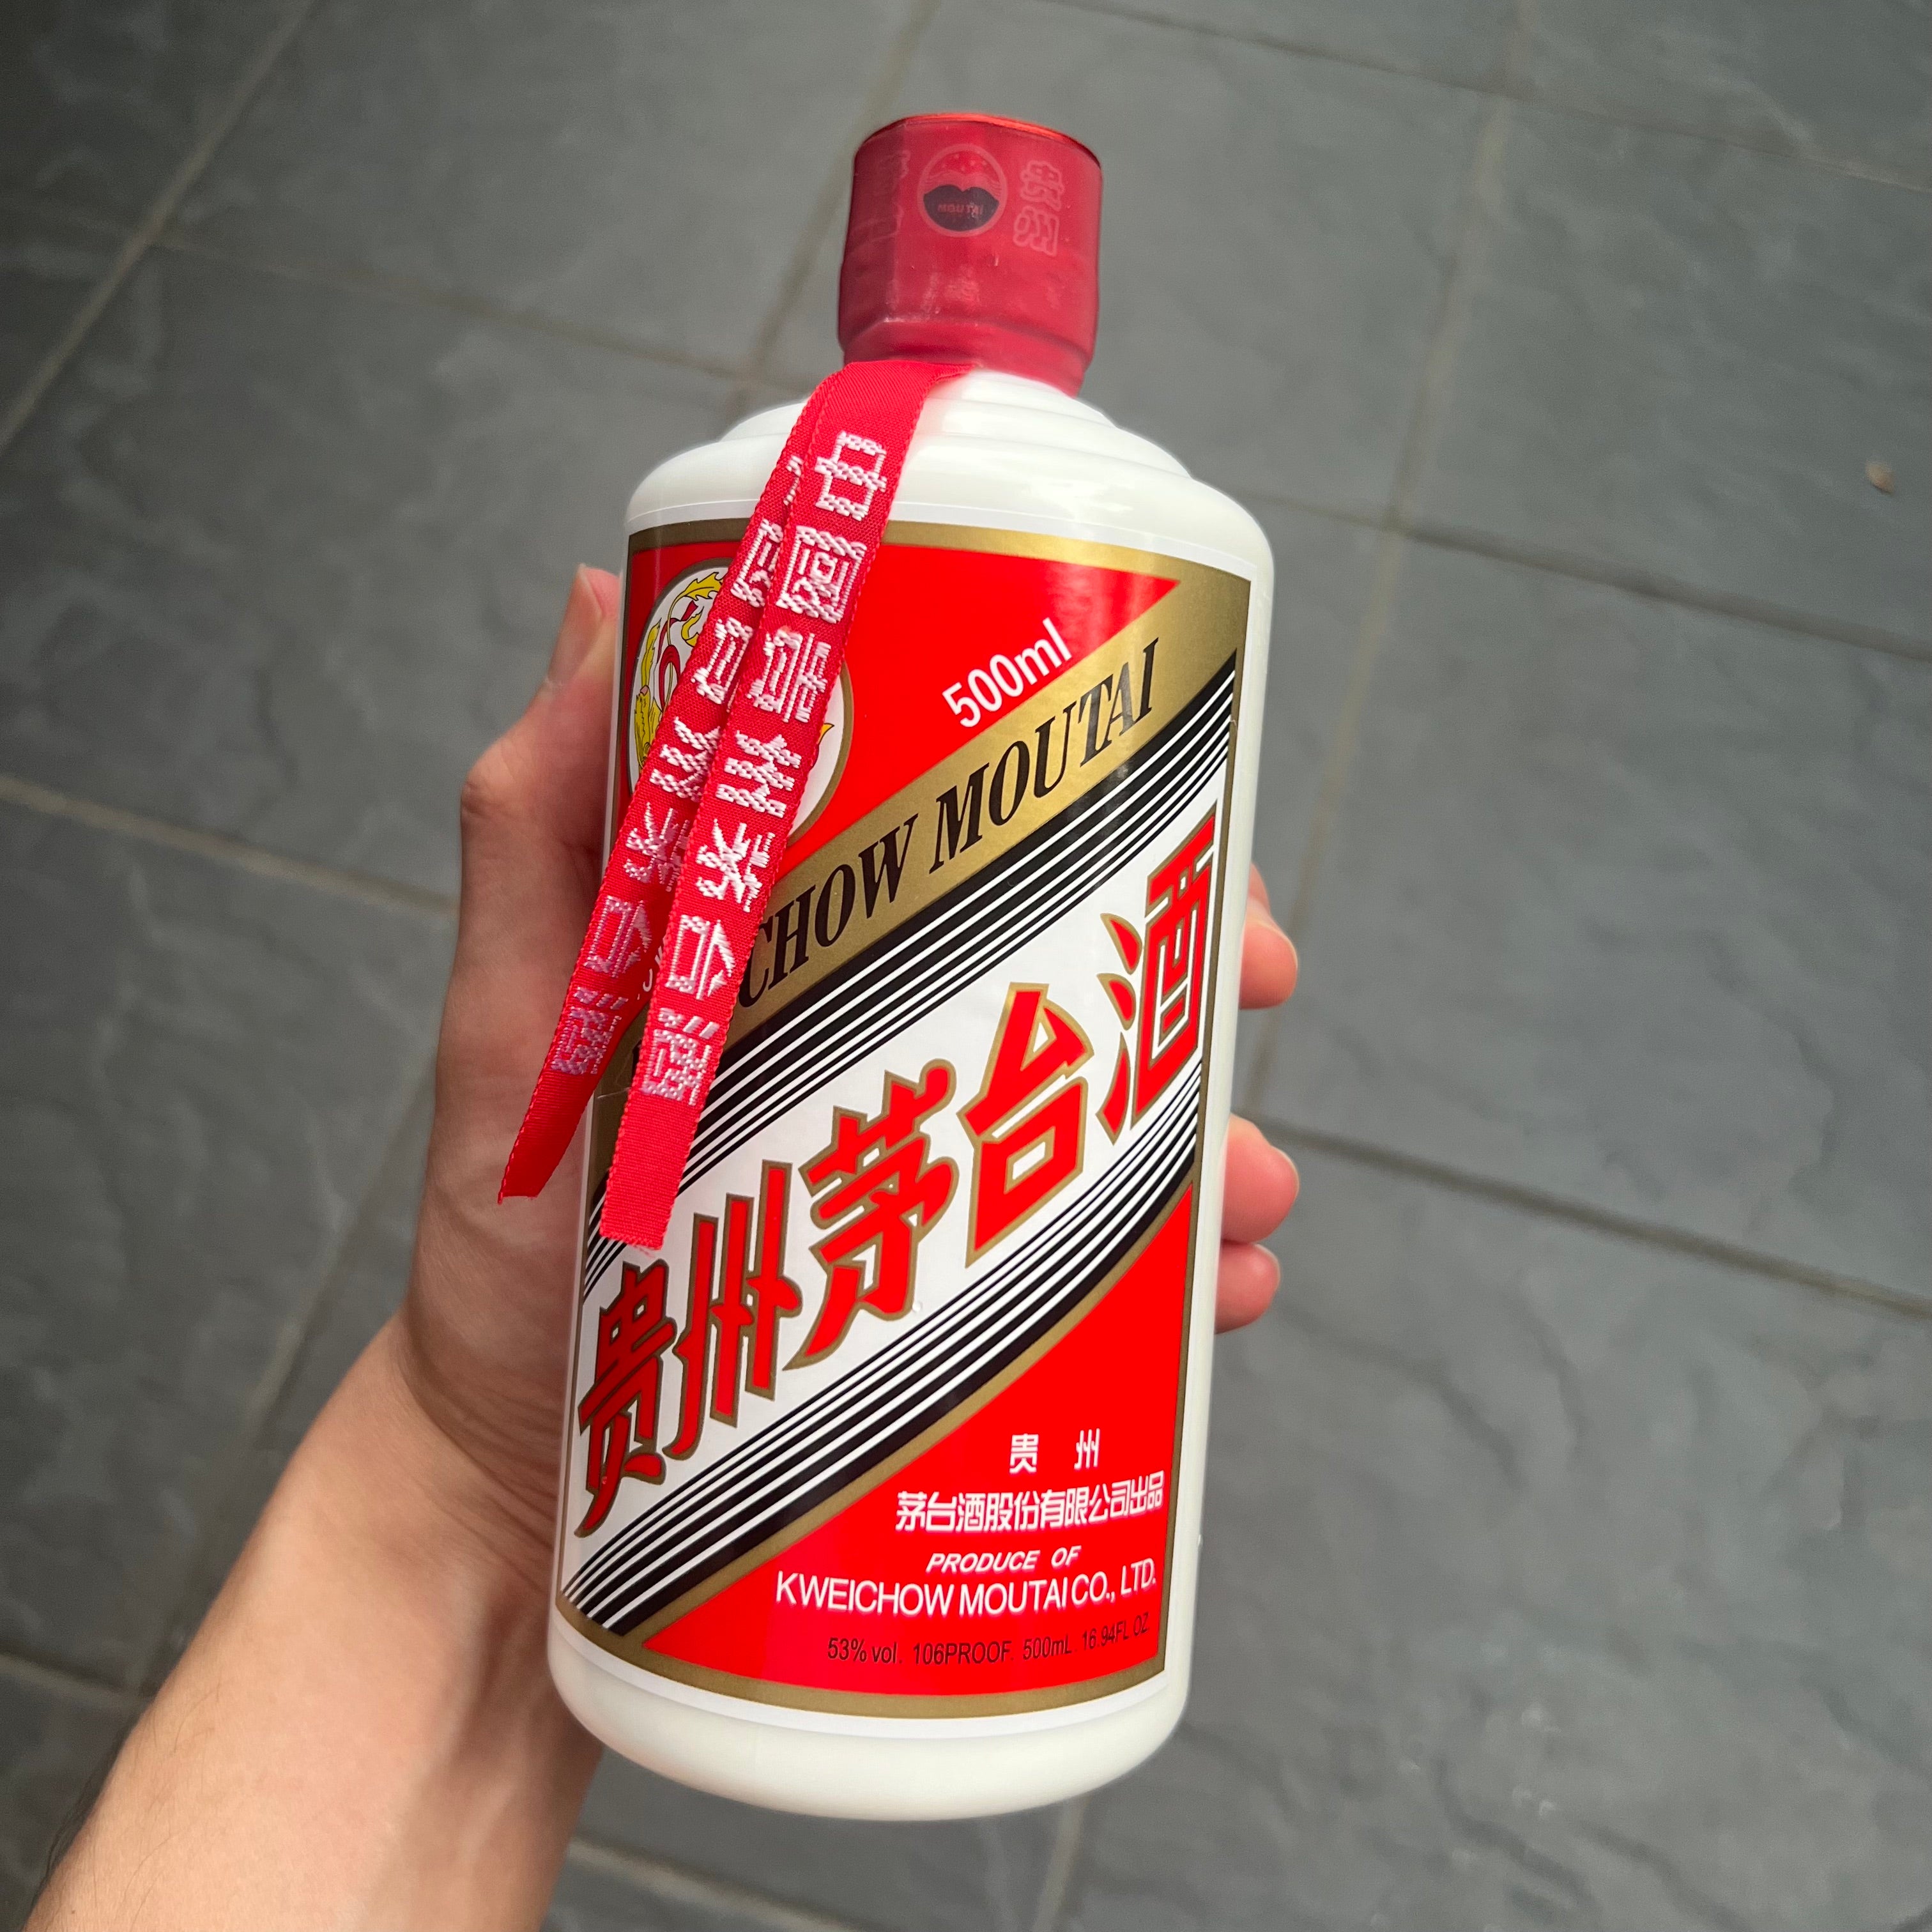 Review] Kweichow Moutai 2019, 53% ABV – 88 Bamboo